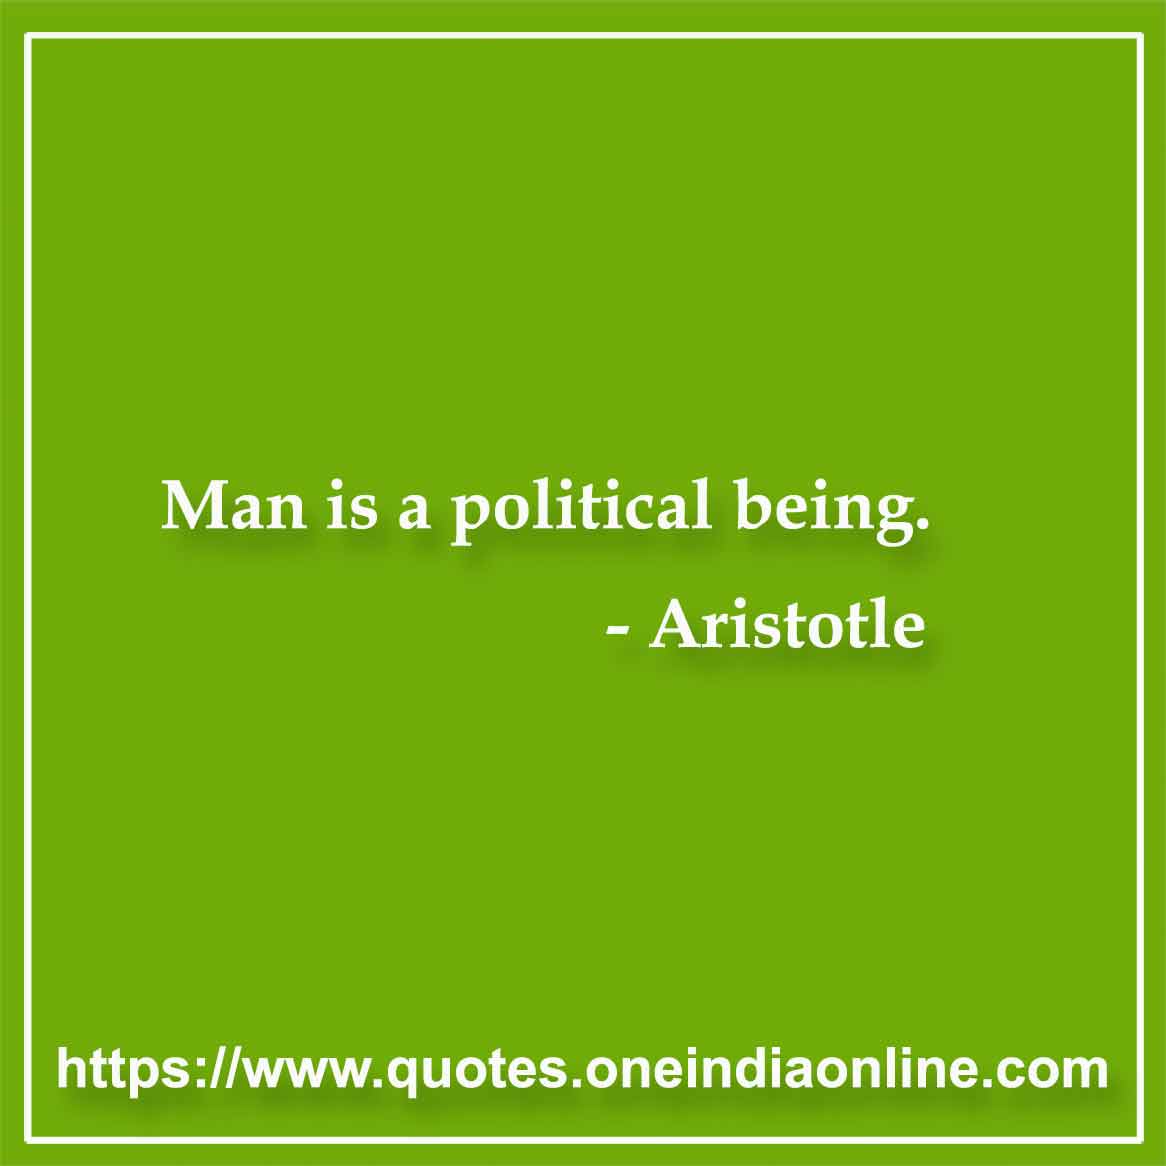 Man is a political being.